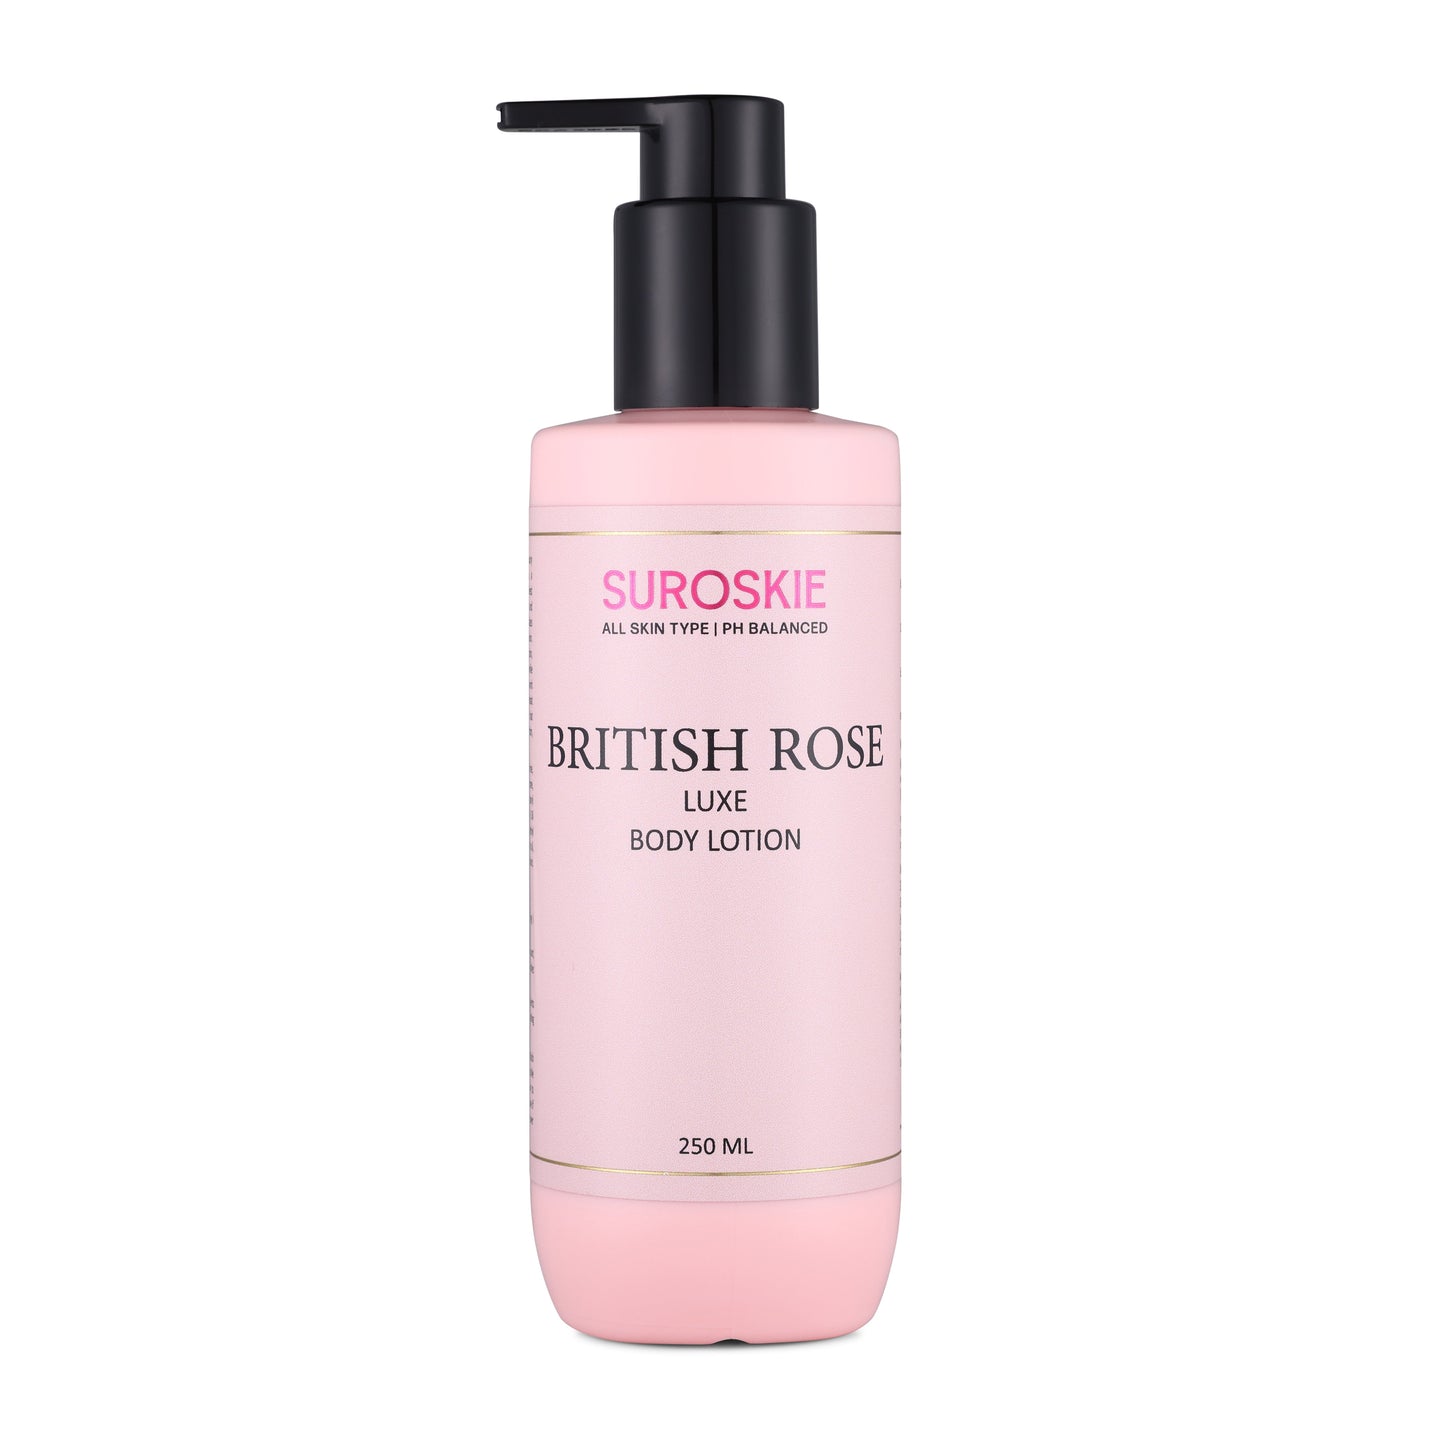 Buy British Rose Body Butter & Body Lotion